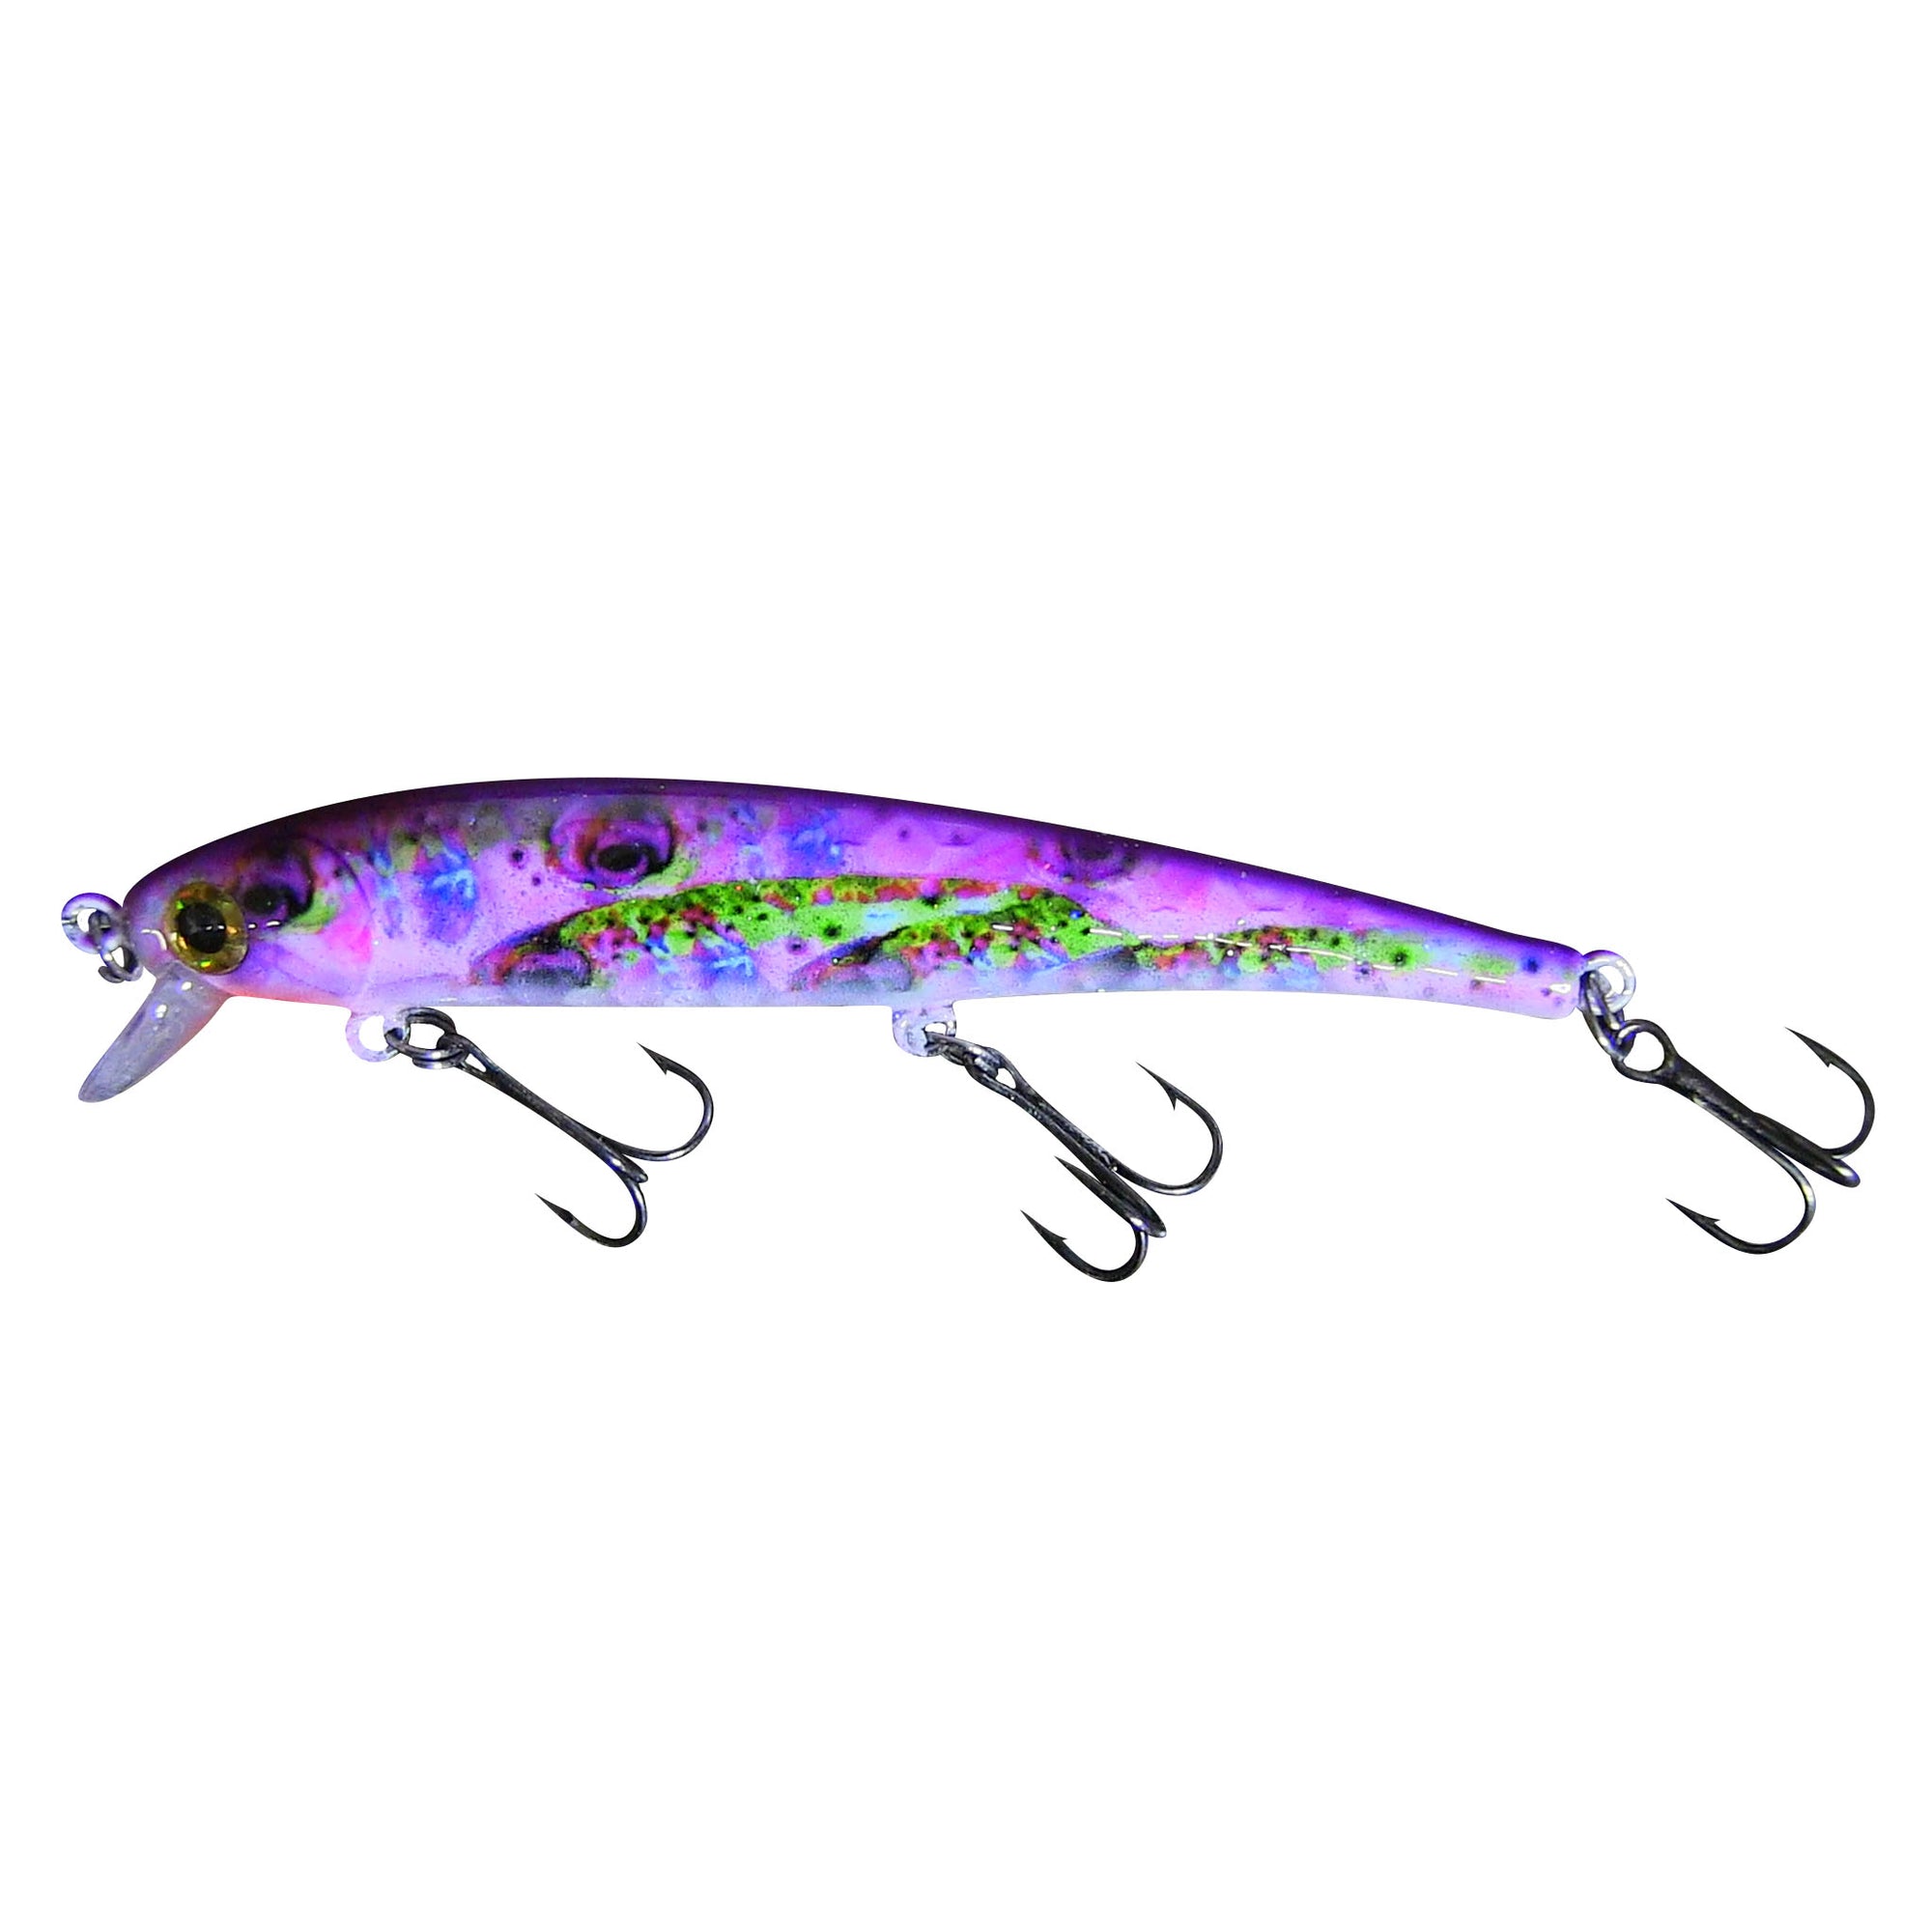 Pink Baby Rainbow Trout 5 HD Schooling Eyes Diver - Reno Bait Company